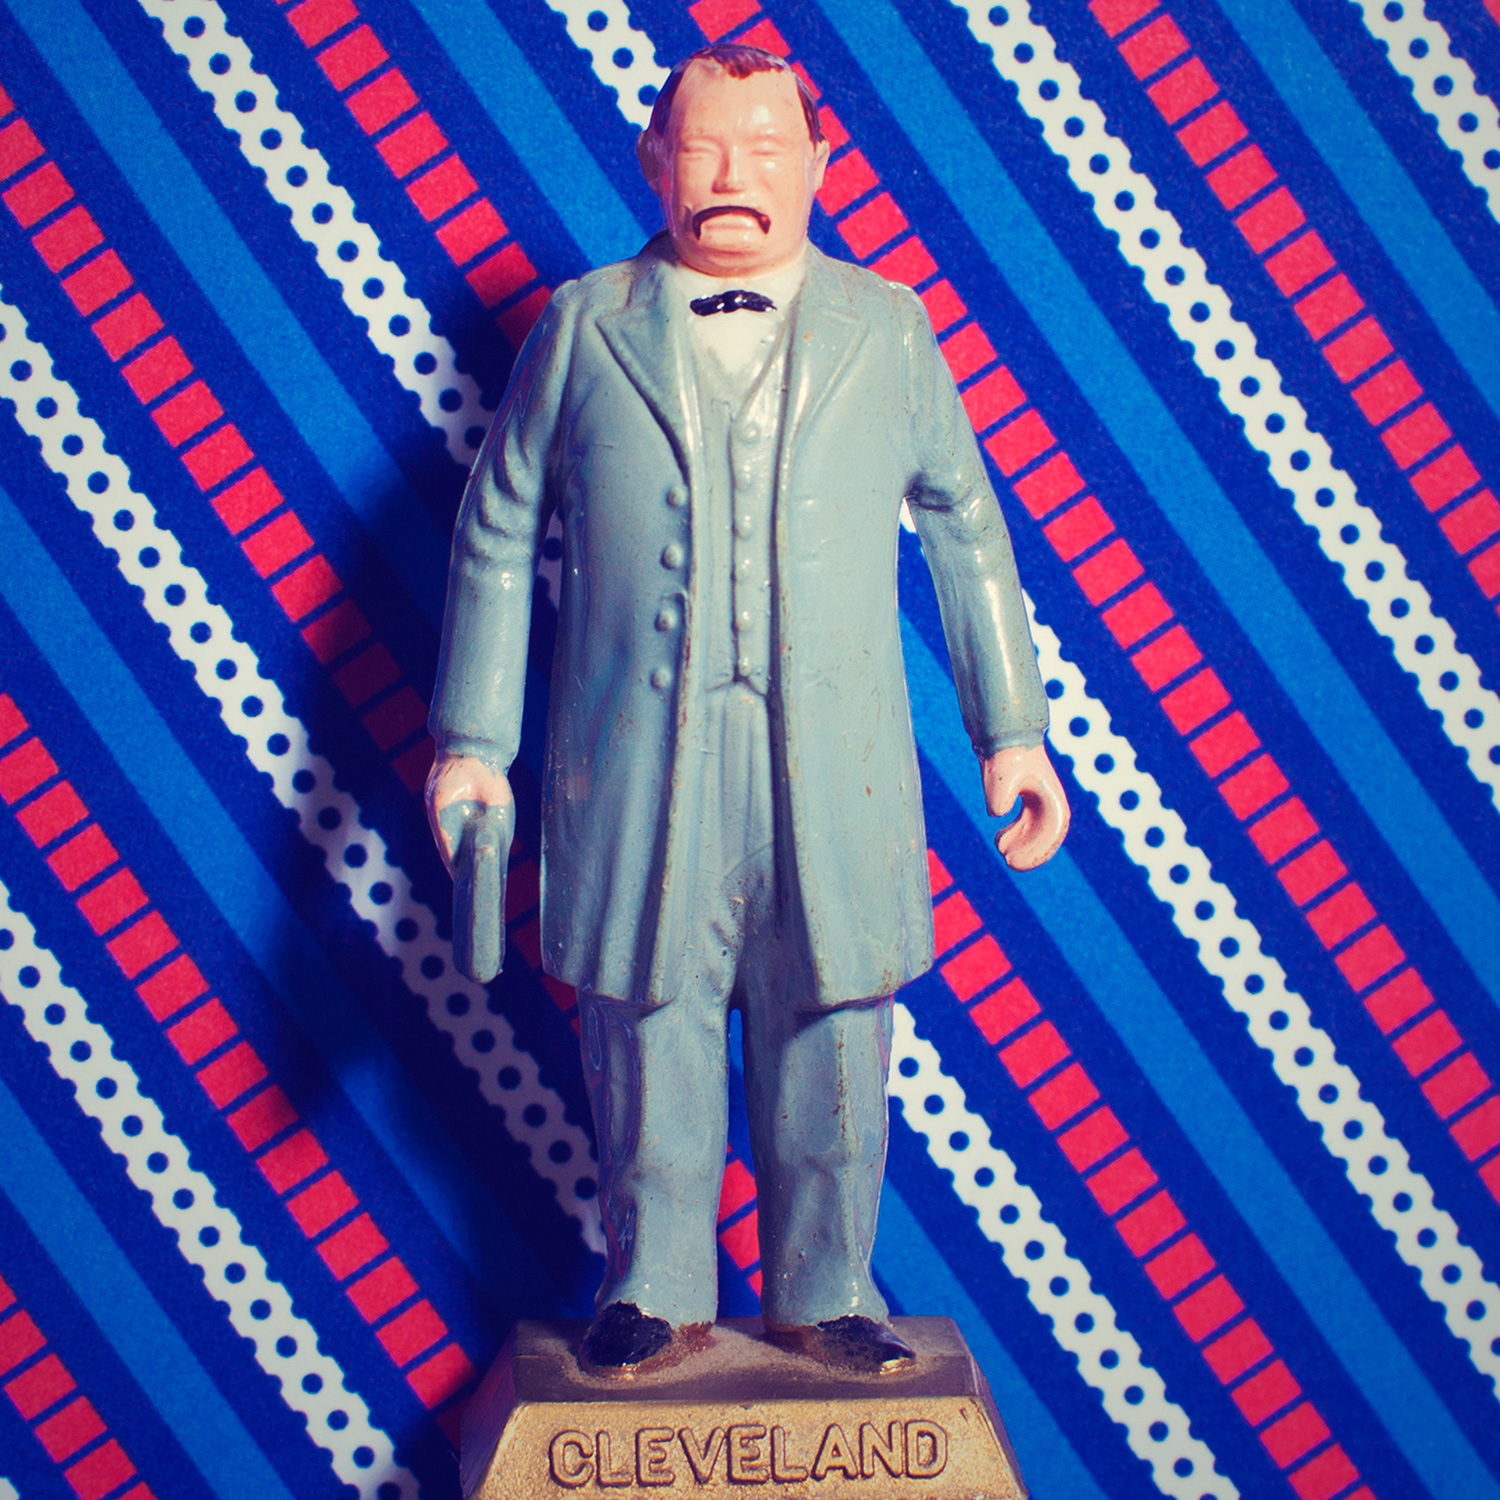 Grover Cleveland: Tell the truth